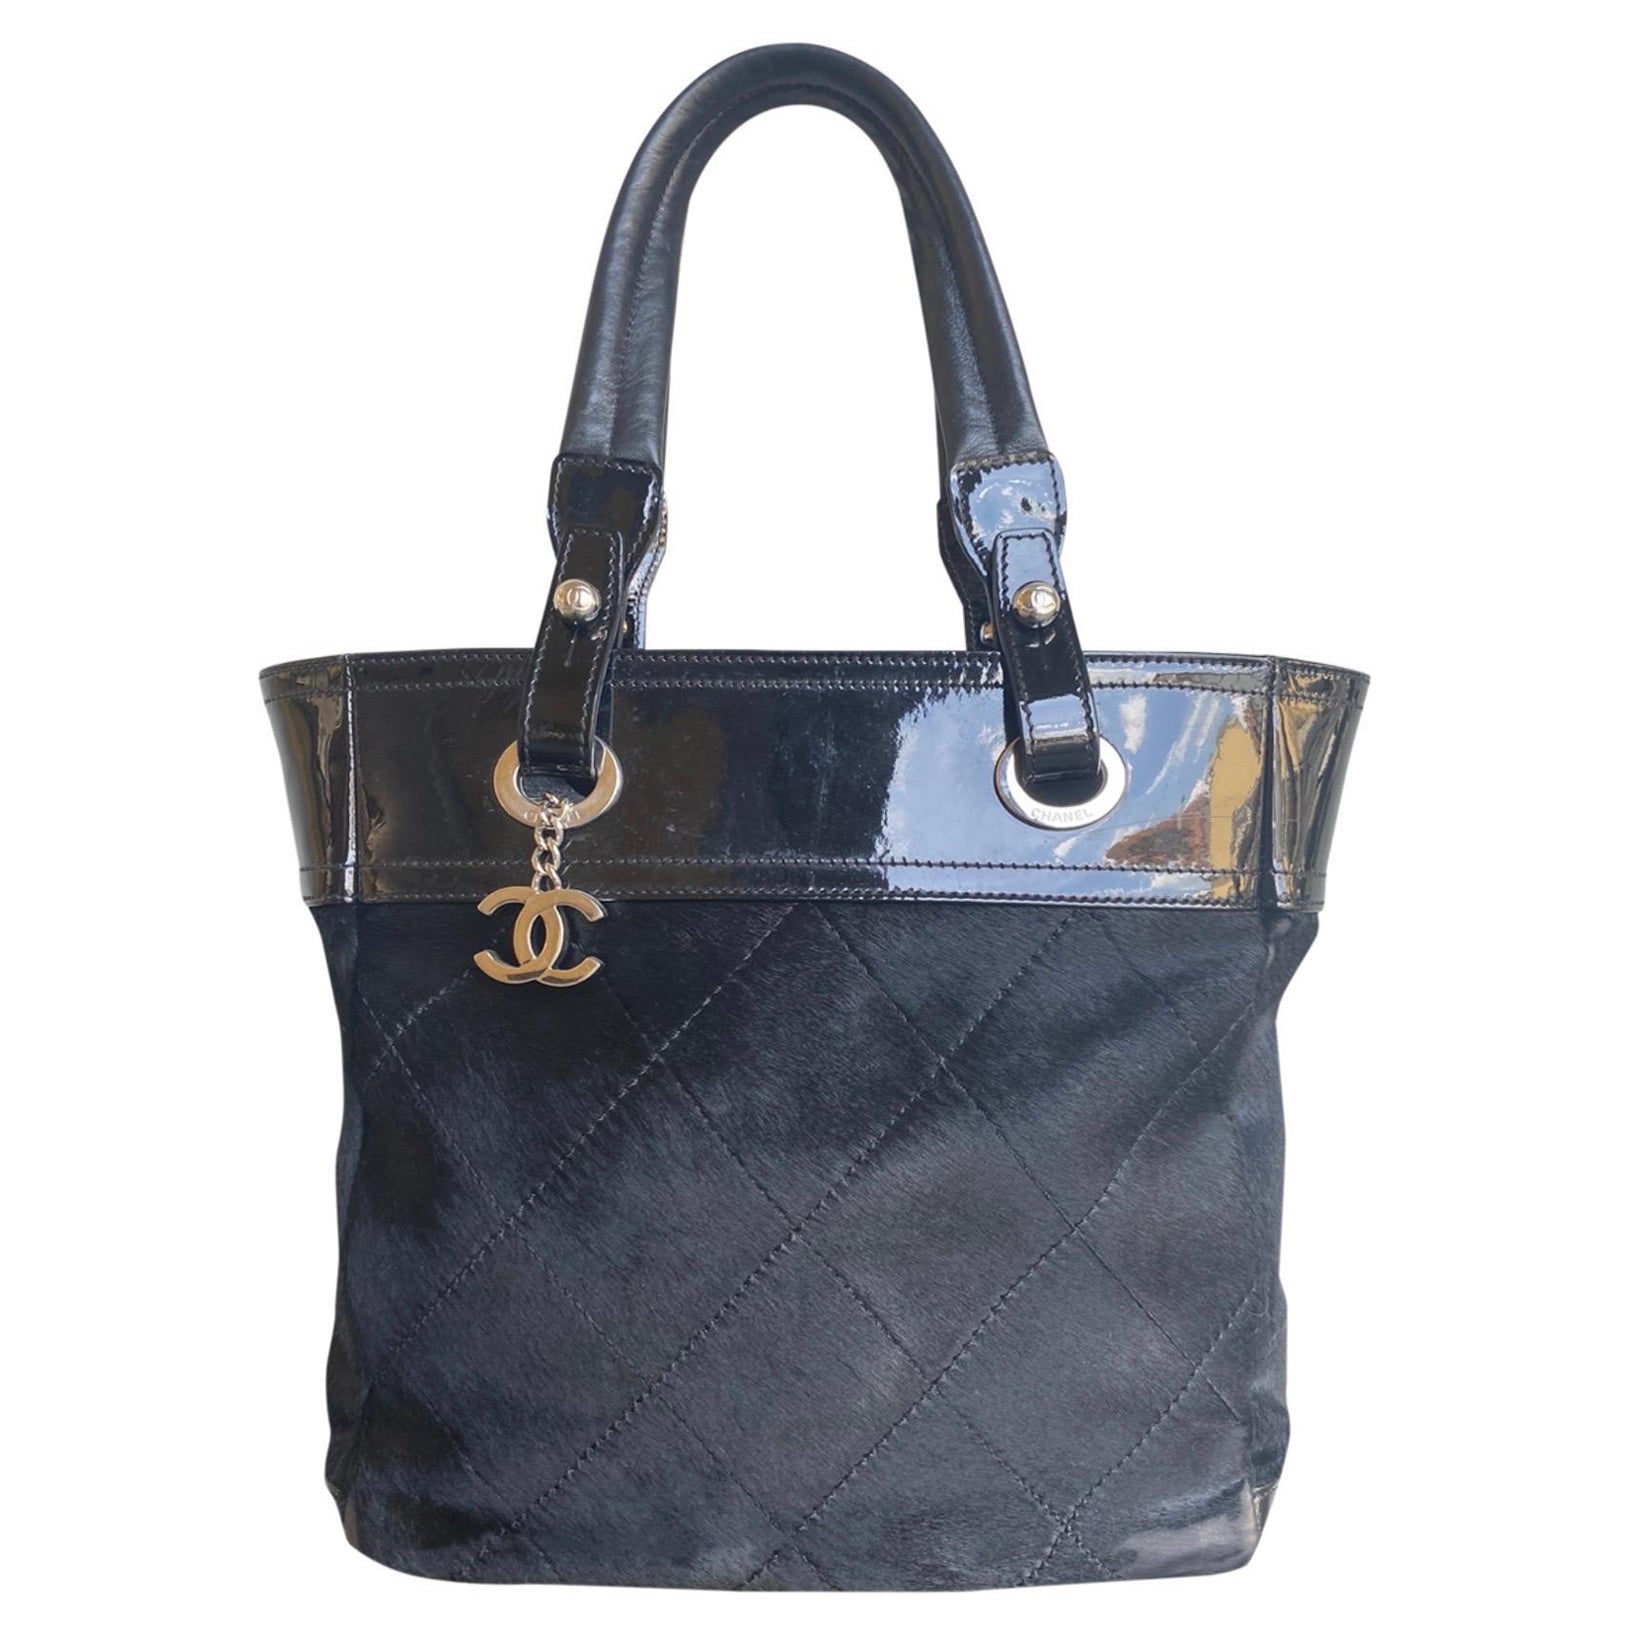 Chanel black Cavallino and patent leather Shoulder Bag